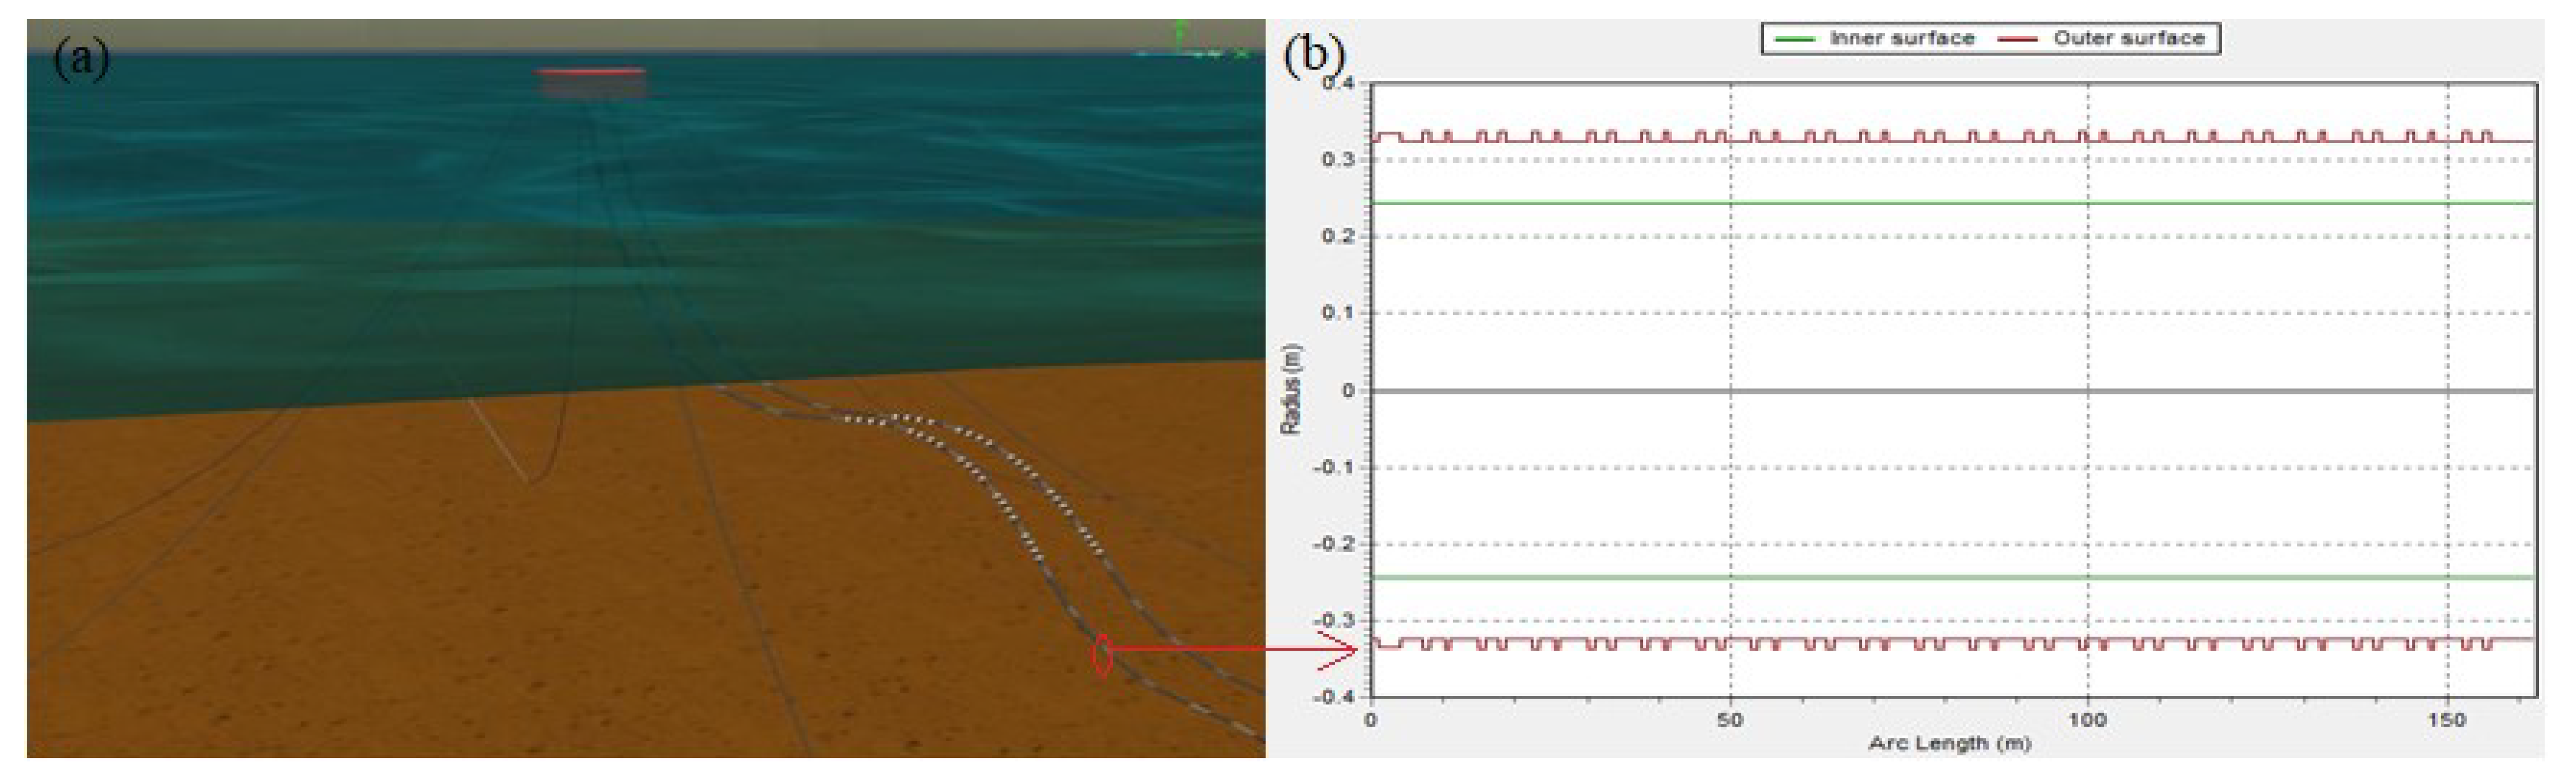 orcaflex seabed friction coefficients